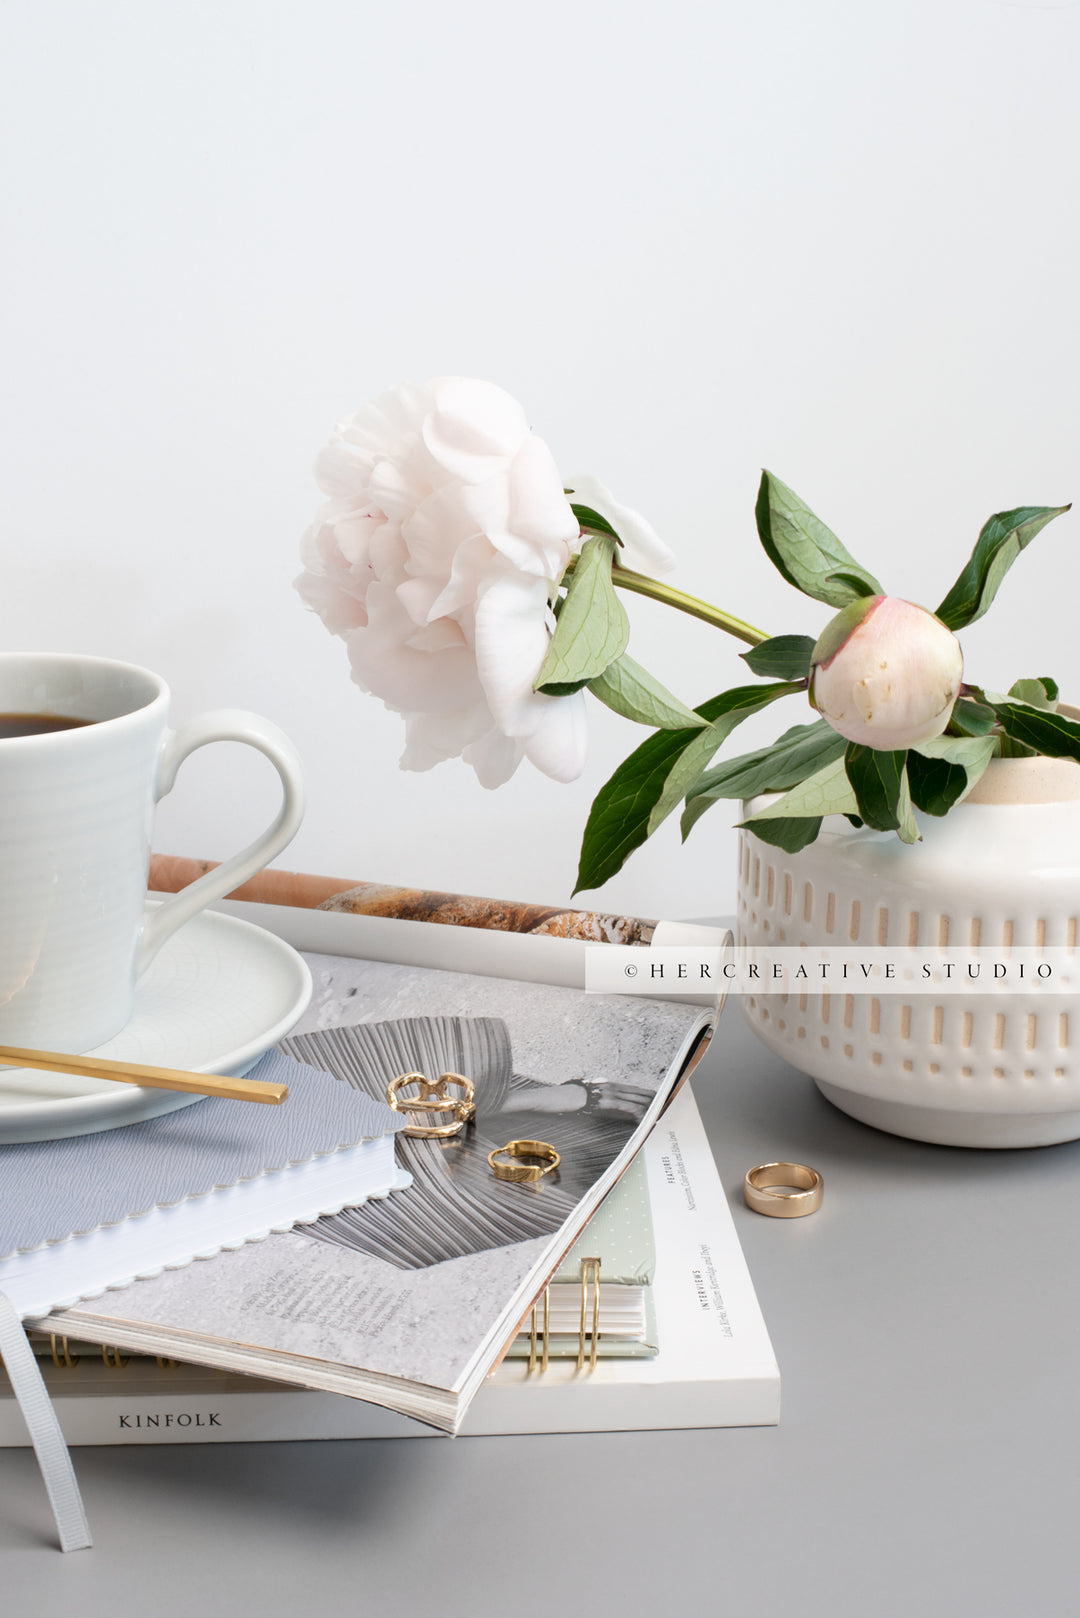 Coffee and Peonies. Stock Image